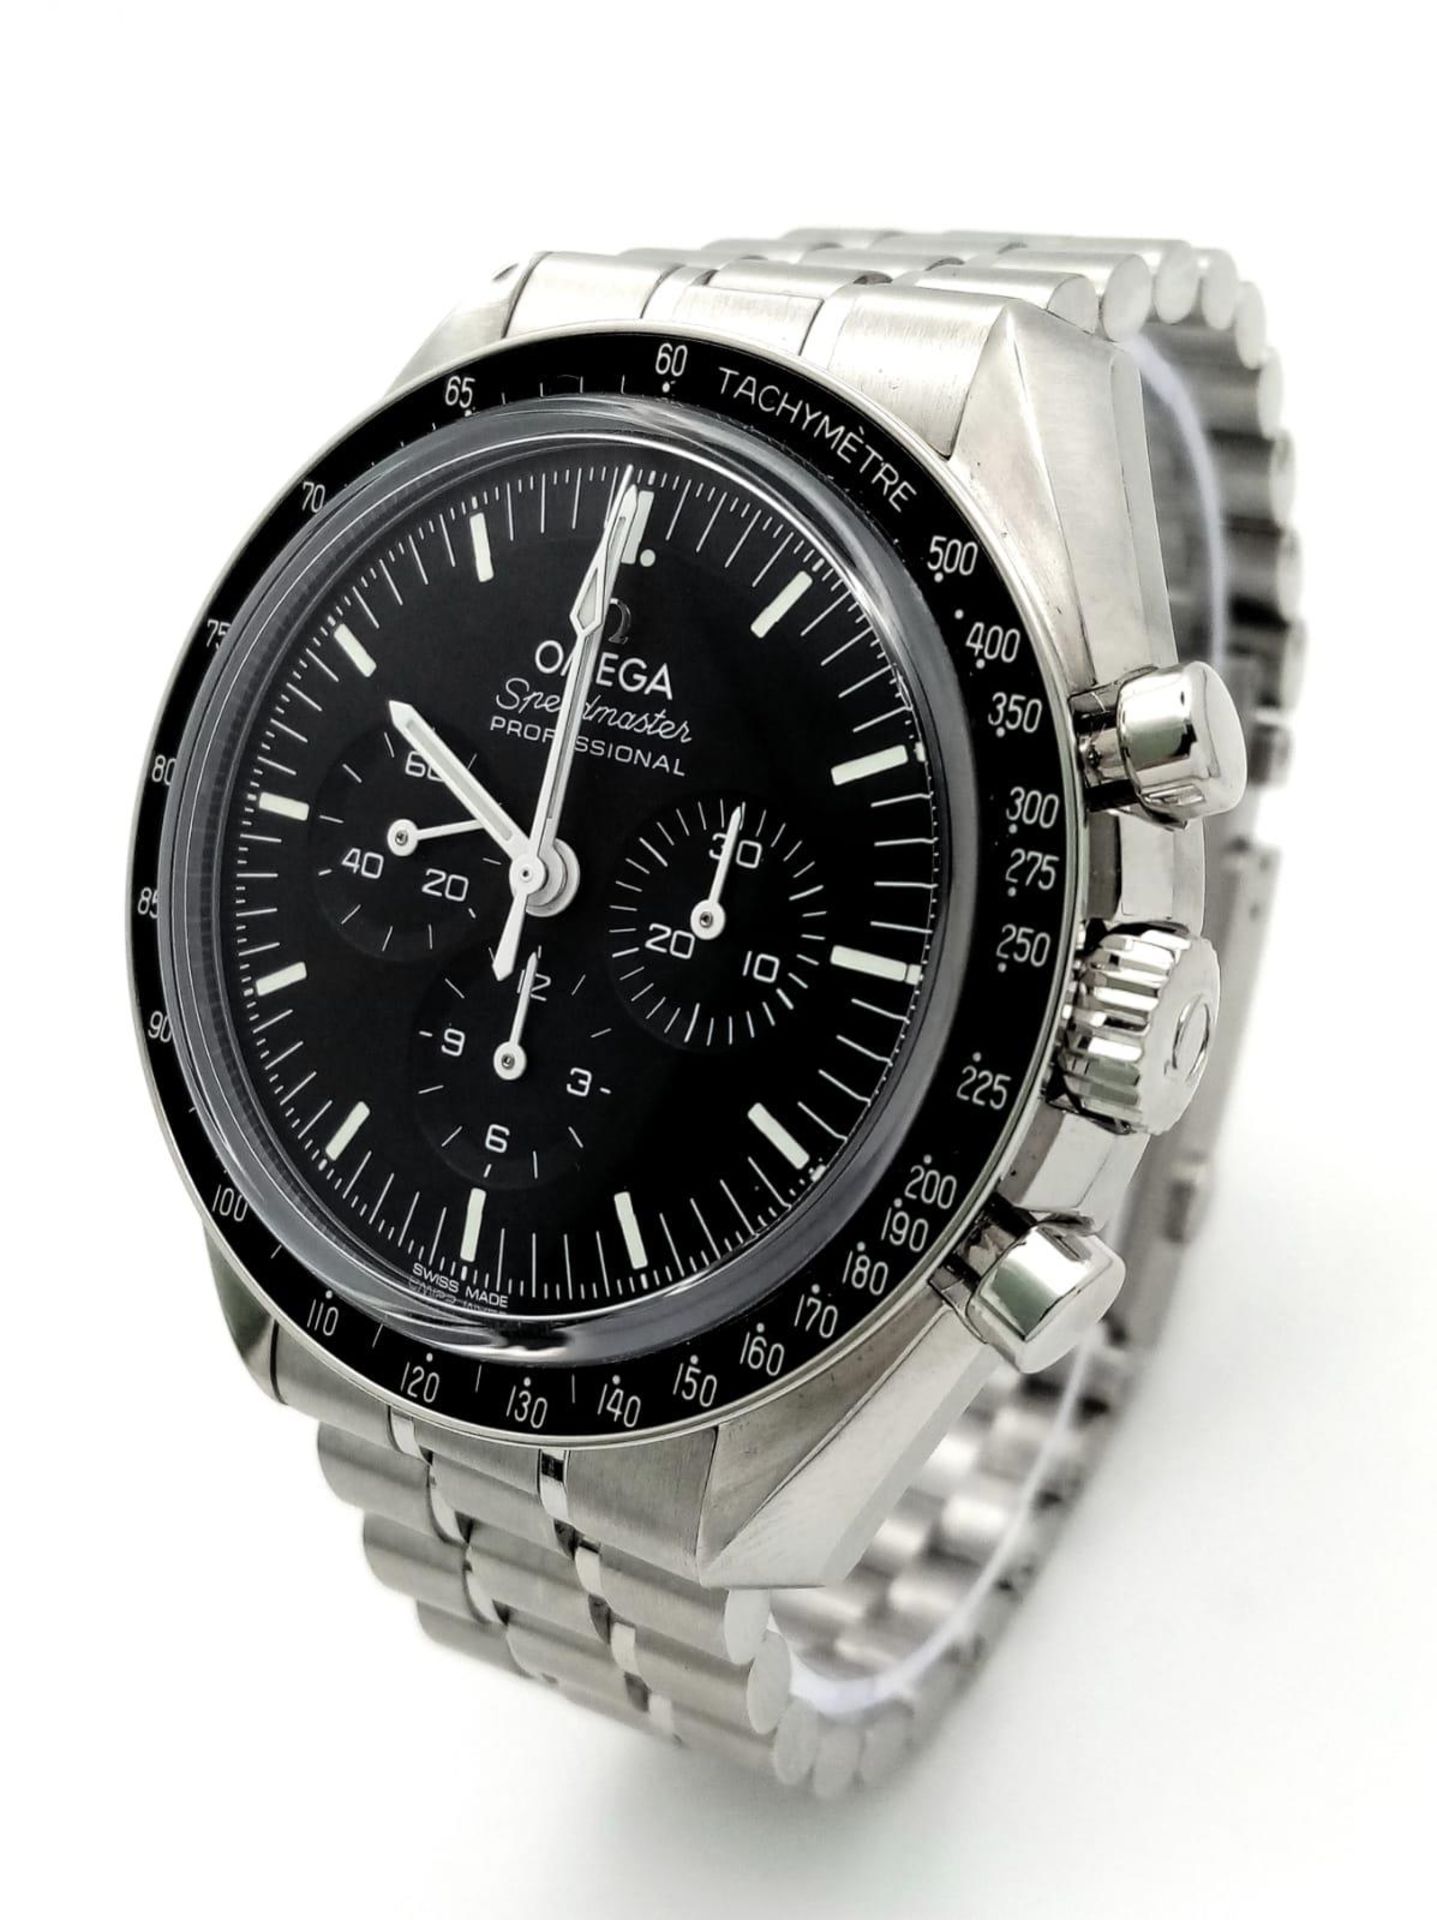 An Omega Speedmaster Moonwatch Chronograph Gents Watch. Stainless steel bracelet and case - 42mm. - Image 2 of 19